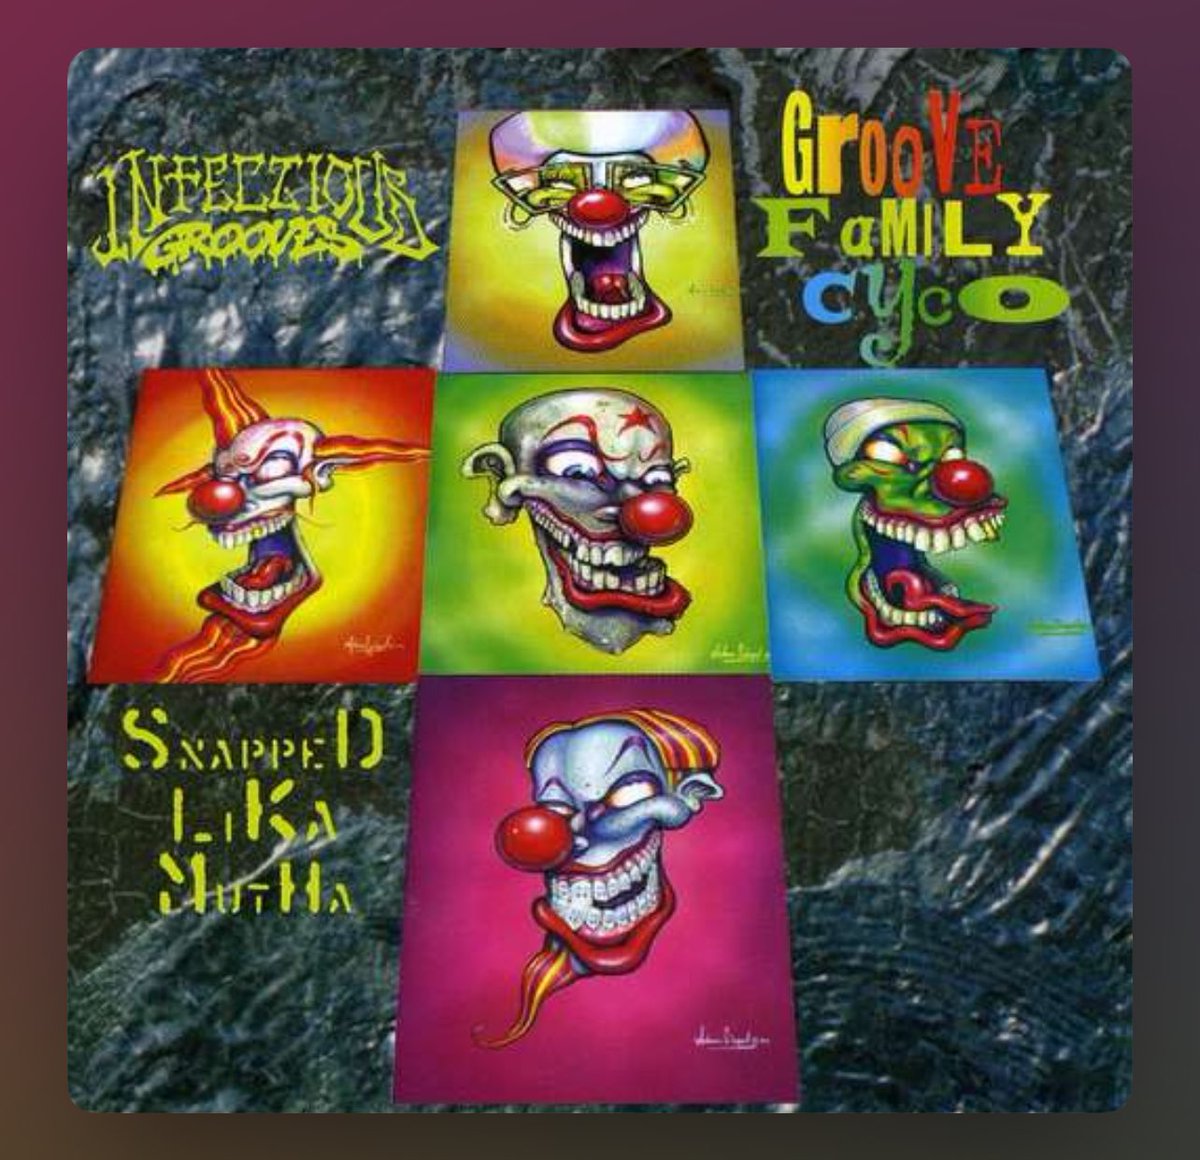 🤘😎🎧 #InfectiousGrooves #GrooveFamilyCyco 🎧🎧🎧